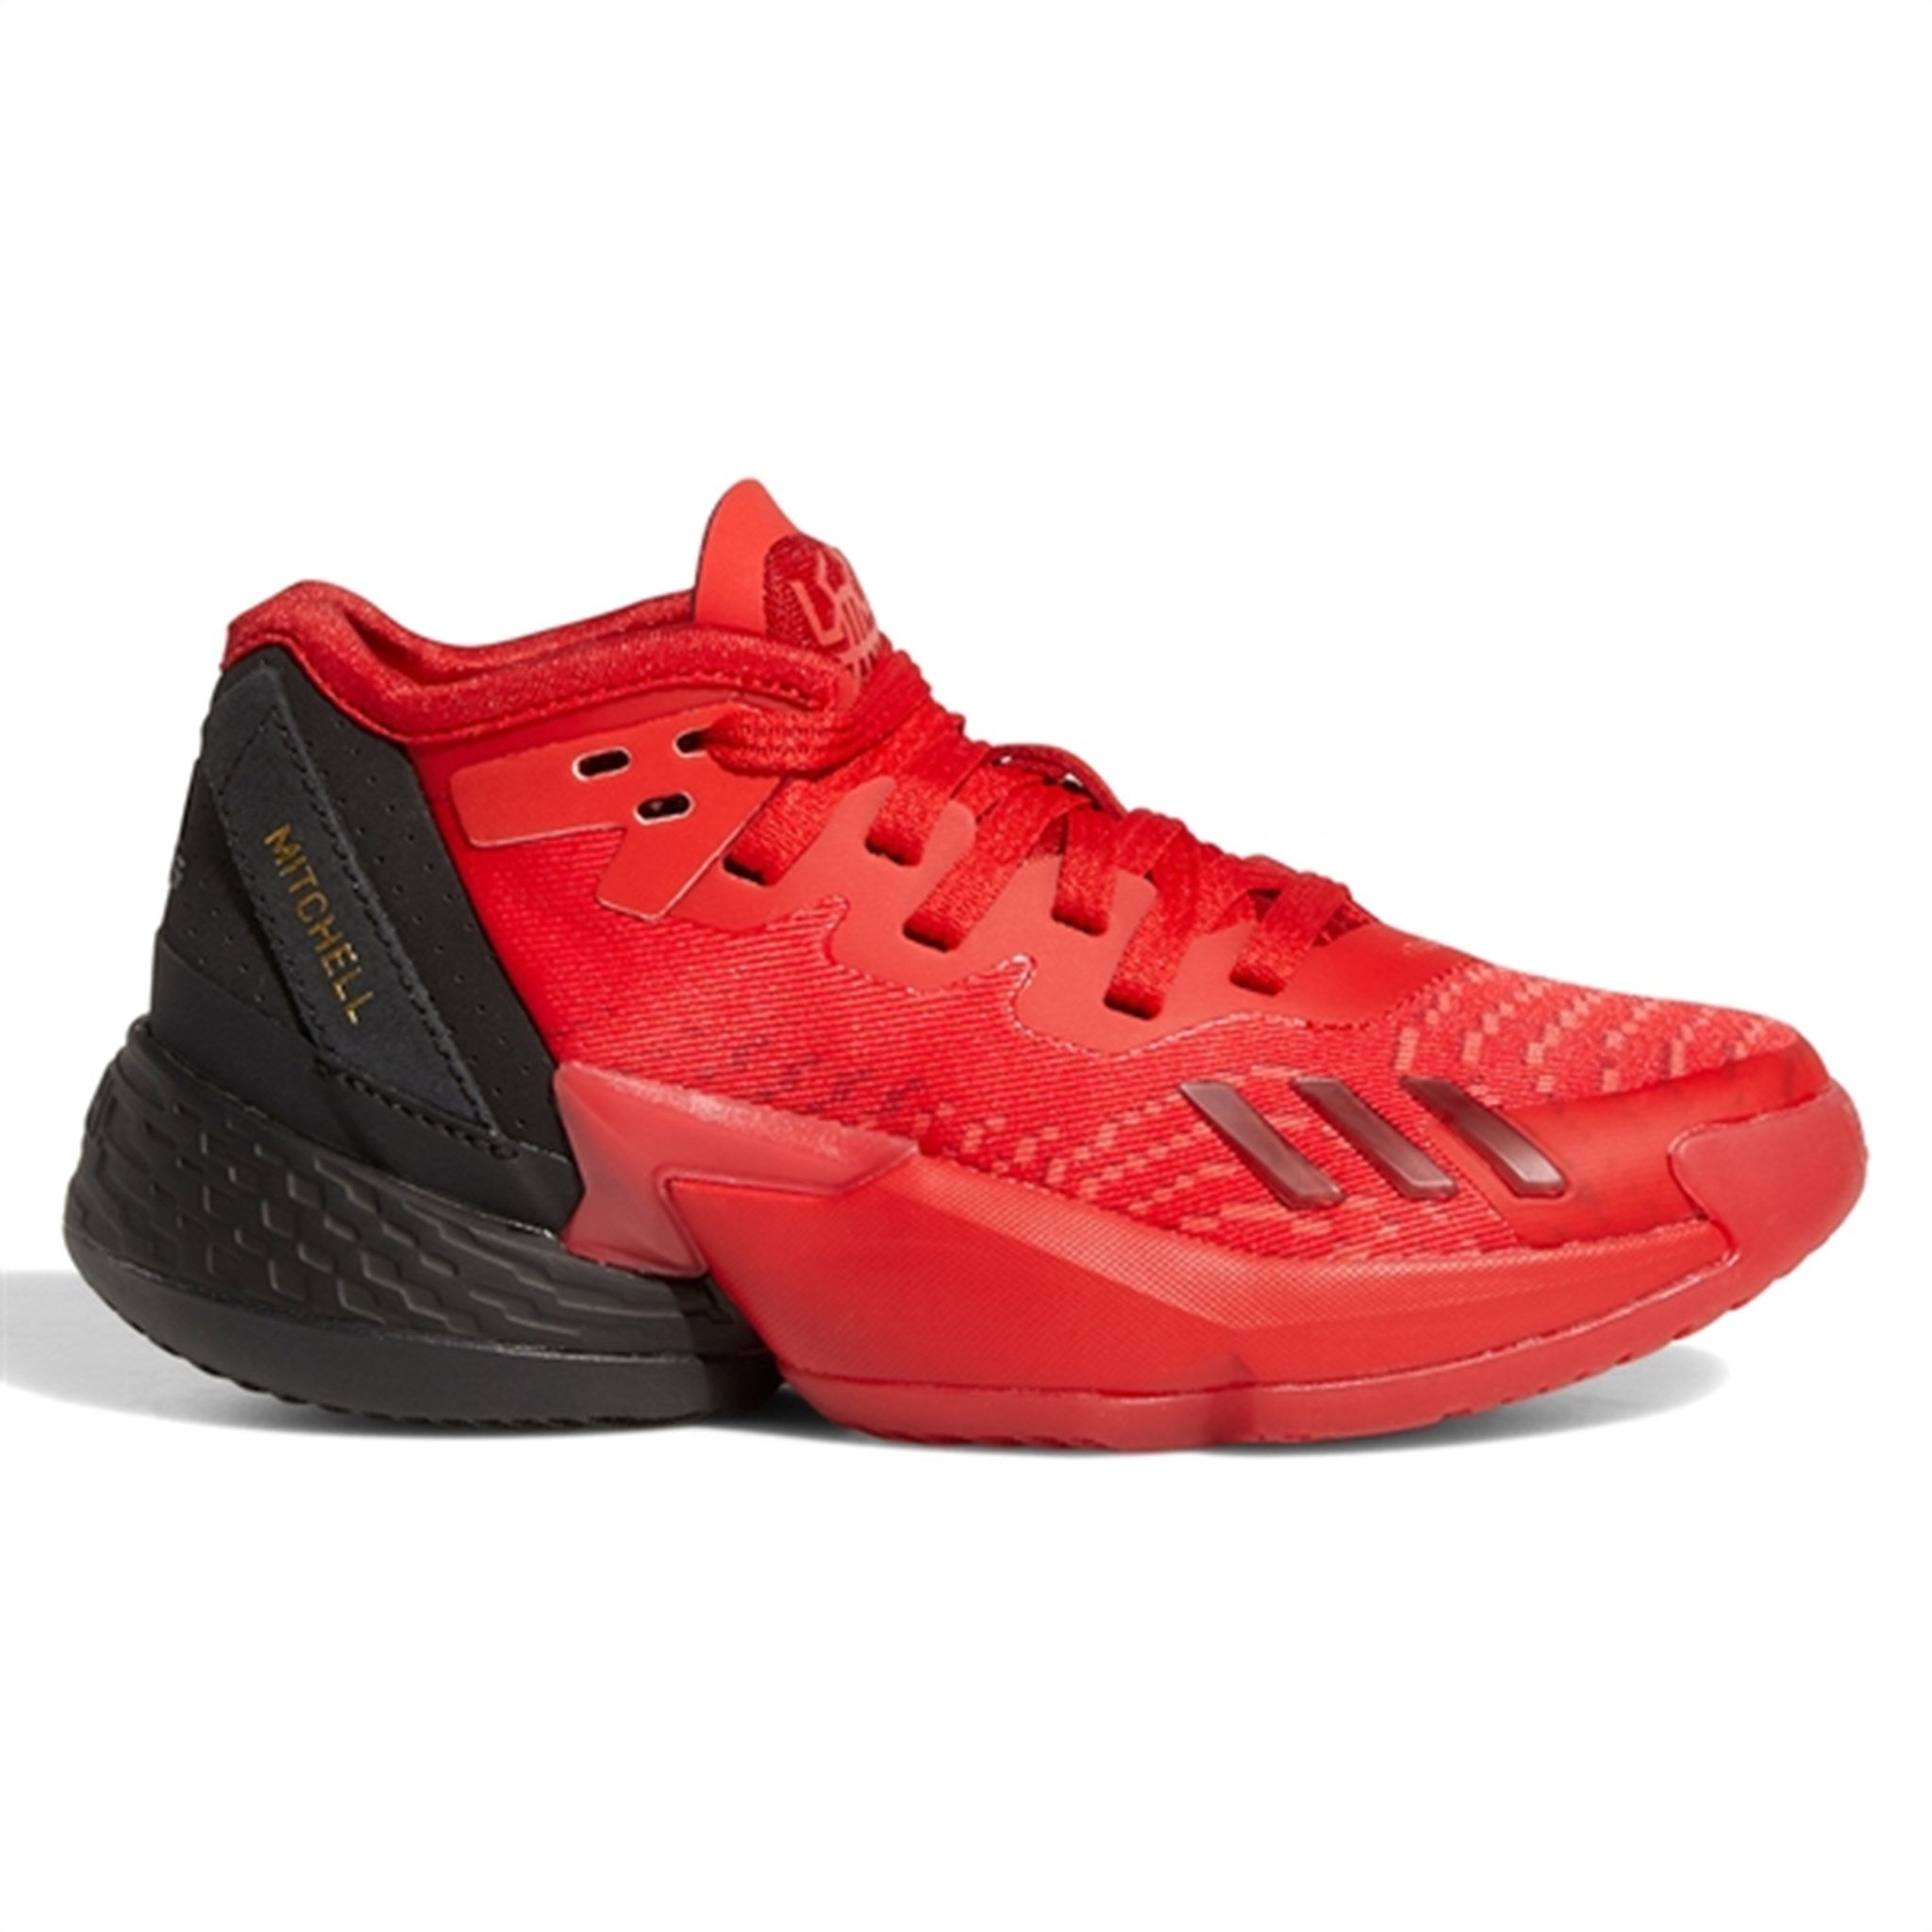 adidas D.O.N. Issue Sneakers Vivid Red